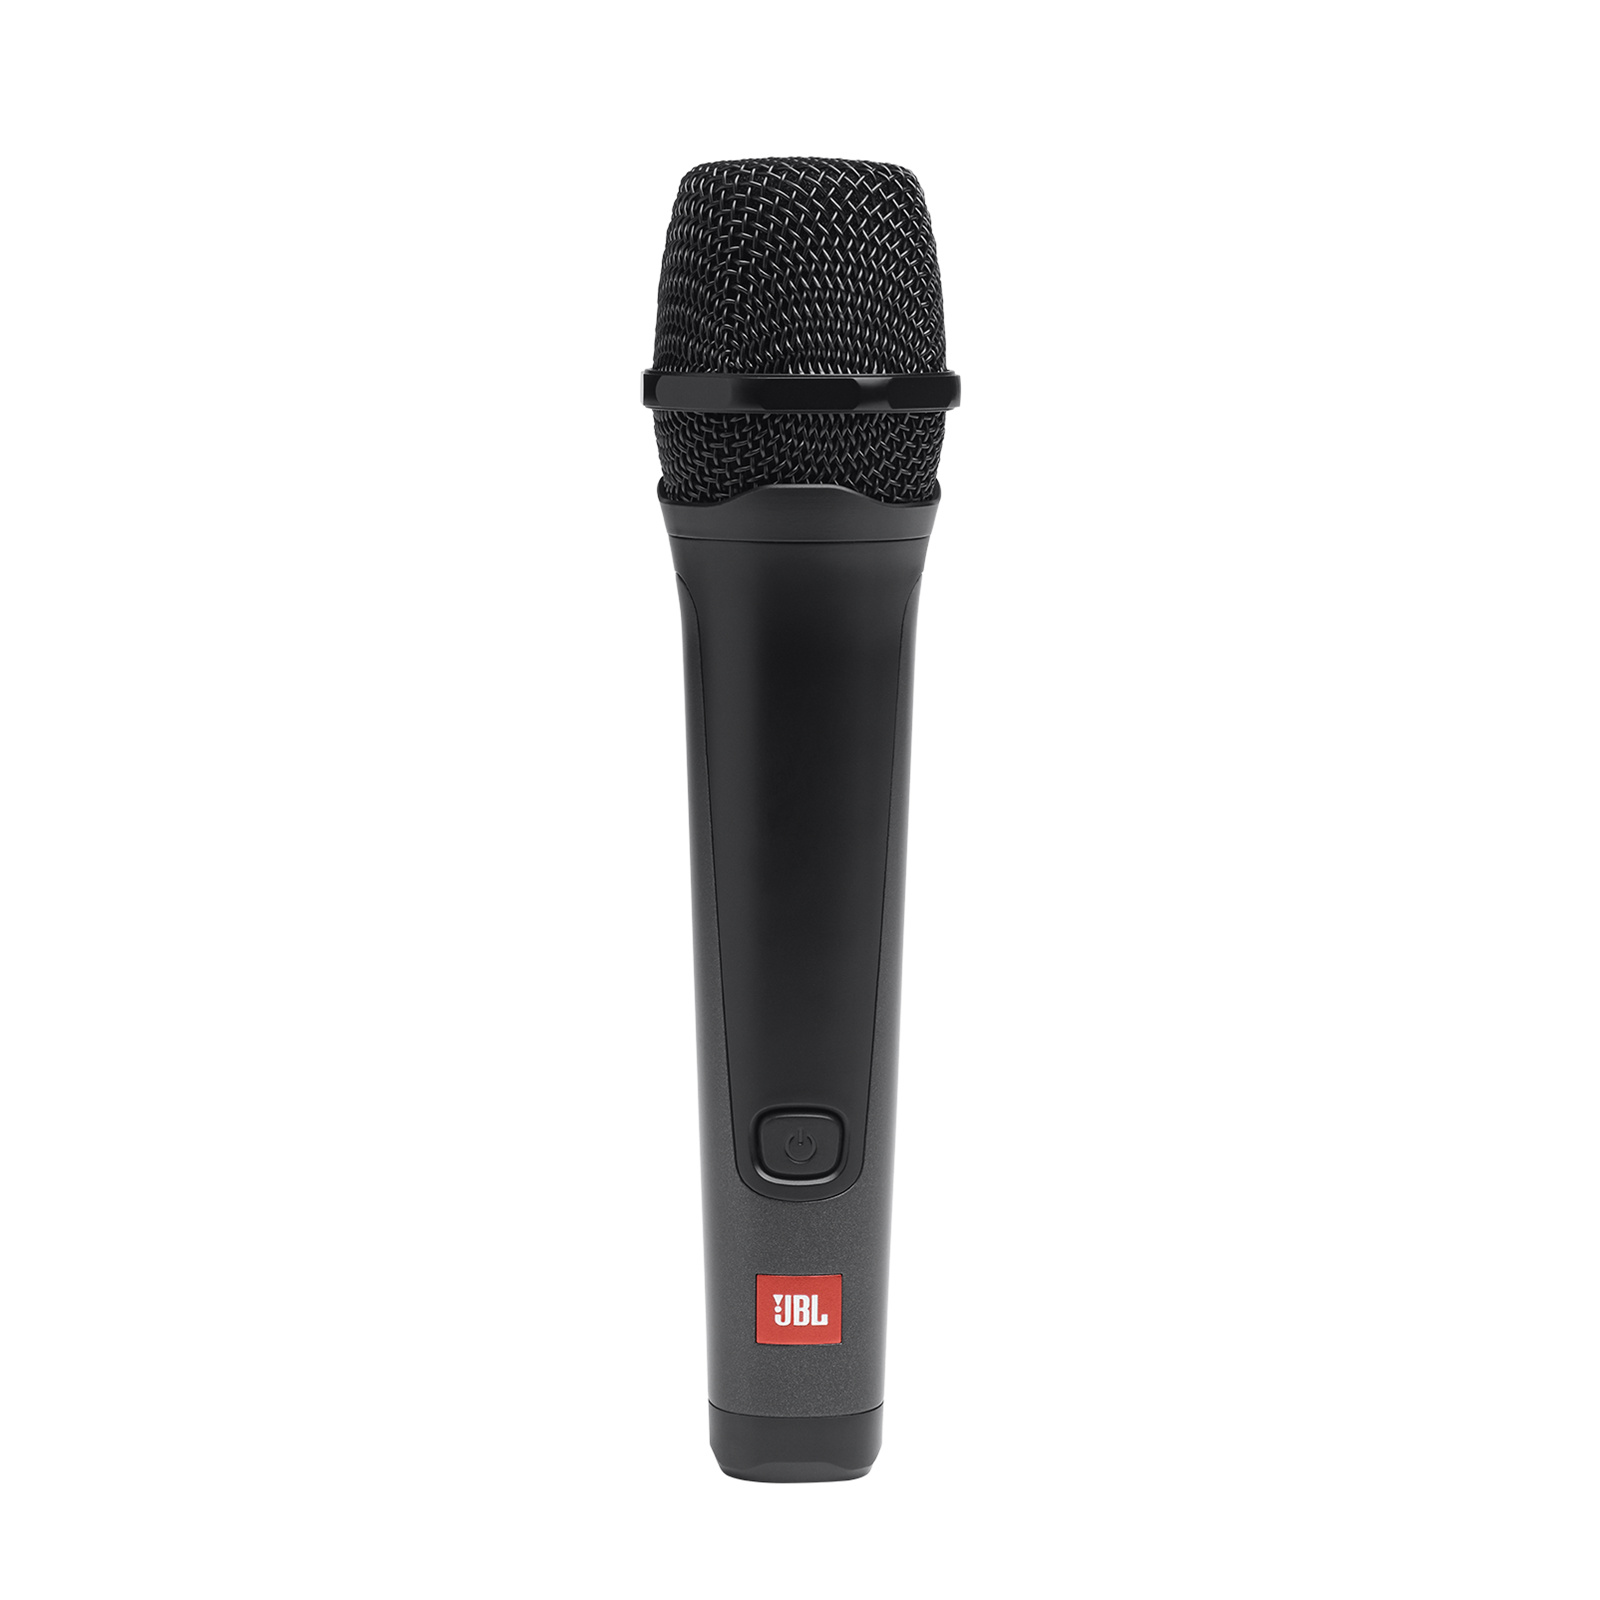 JBL PartyBox PBM100 Wired Dynamic Vocal Microphone - Black - 3 metre cable - NZ DEPOT